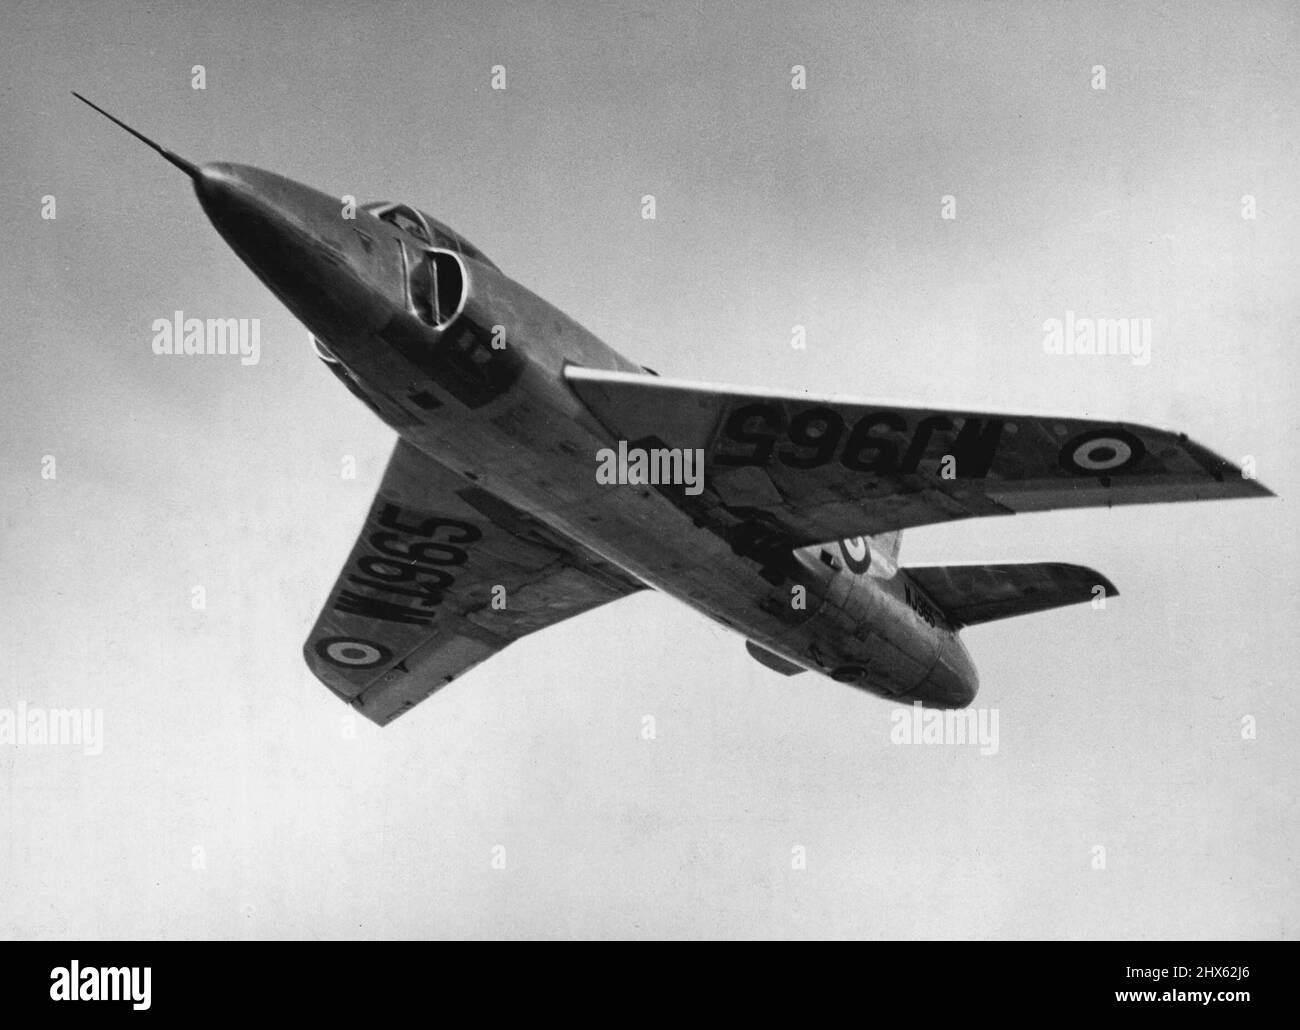 Pre-View At Farnborough Supermarine Swift, one Rolls-Royce Avon turbo-jet engine, single seat, swept-wing fighter, seen in flight at the Farnborough preview today. It is in super-priority production for the RAF. September 01, 1952. Stock Photo